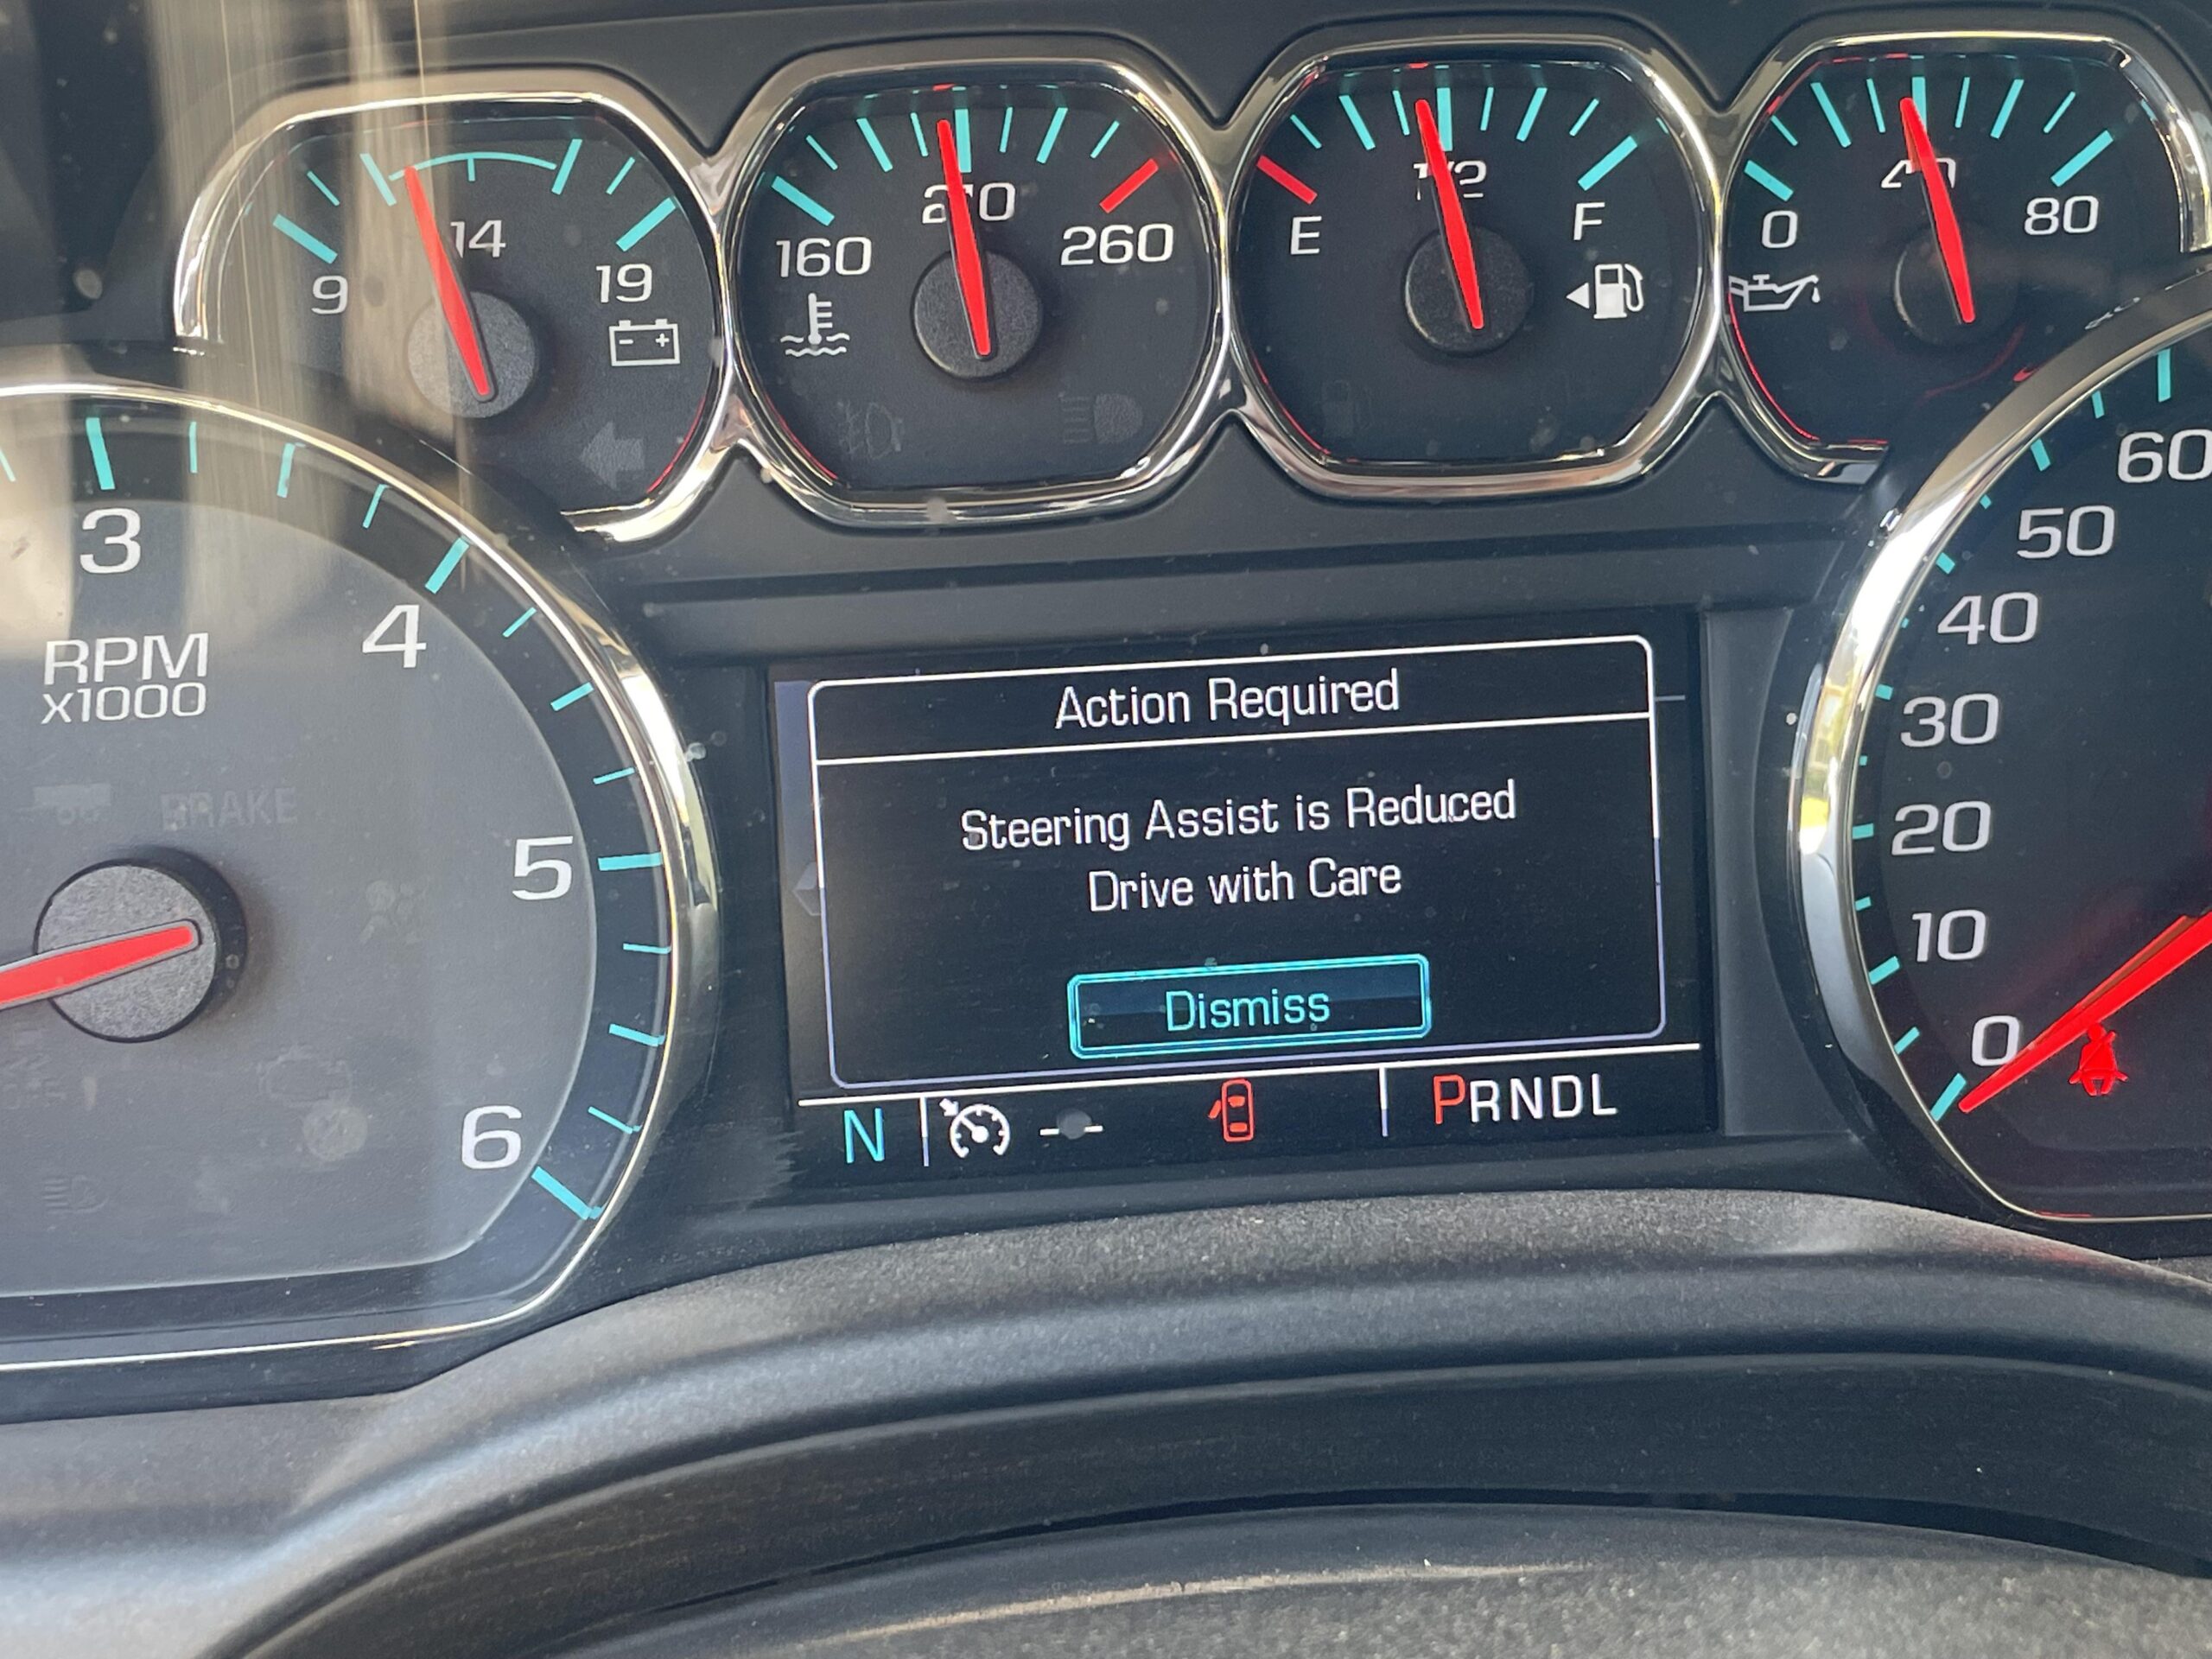 You are currently viewing Decoding The Service Passive Entry System Message In A Car